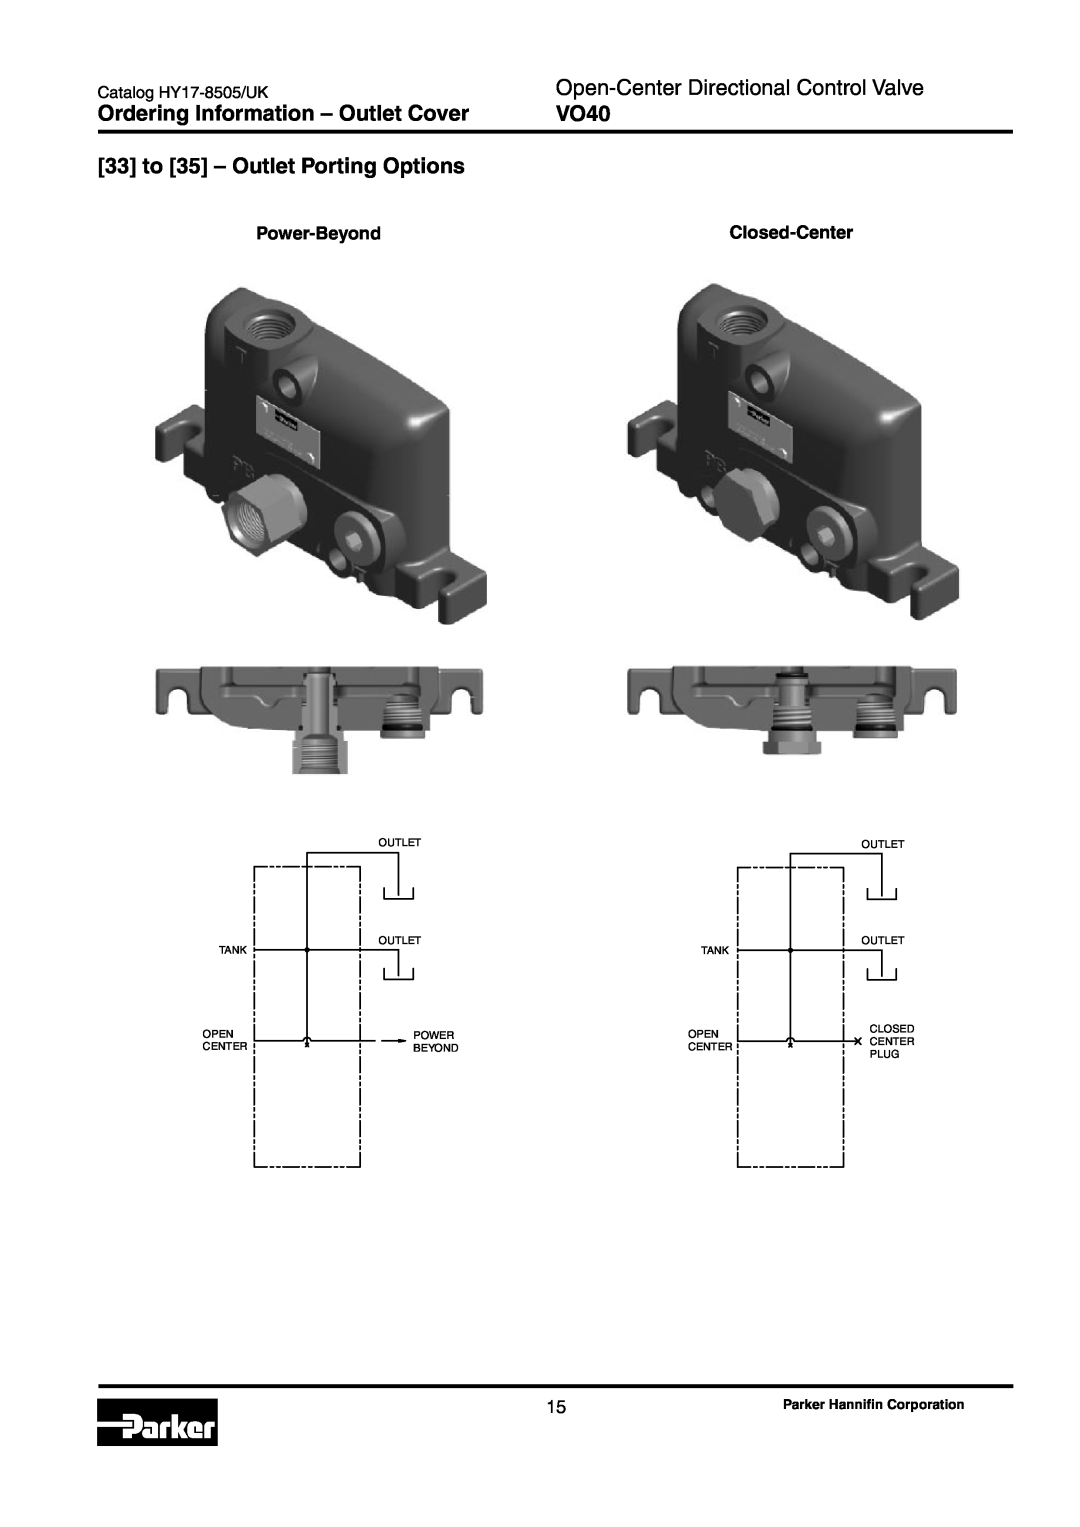 Parker Hannifin VO40 manual Open-Center Directional Control Valve, Ordering Information - Outlet Cover 